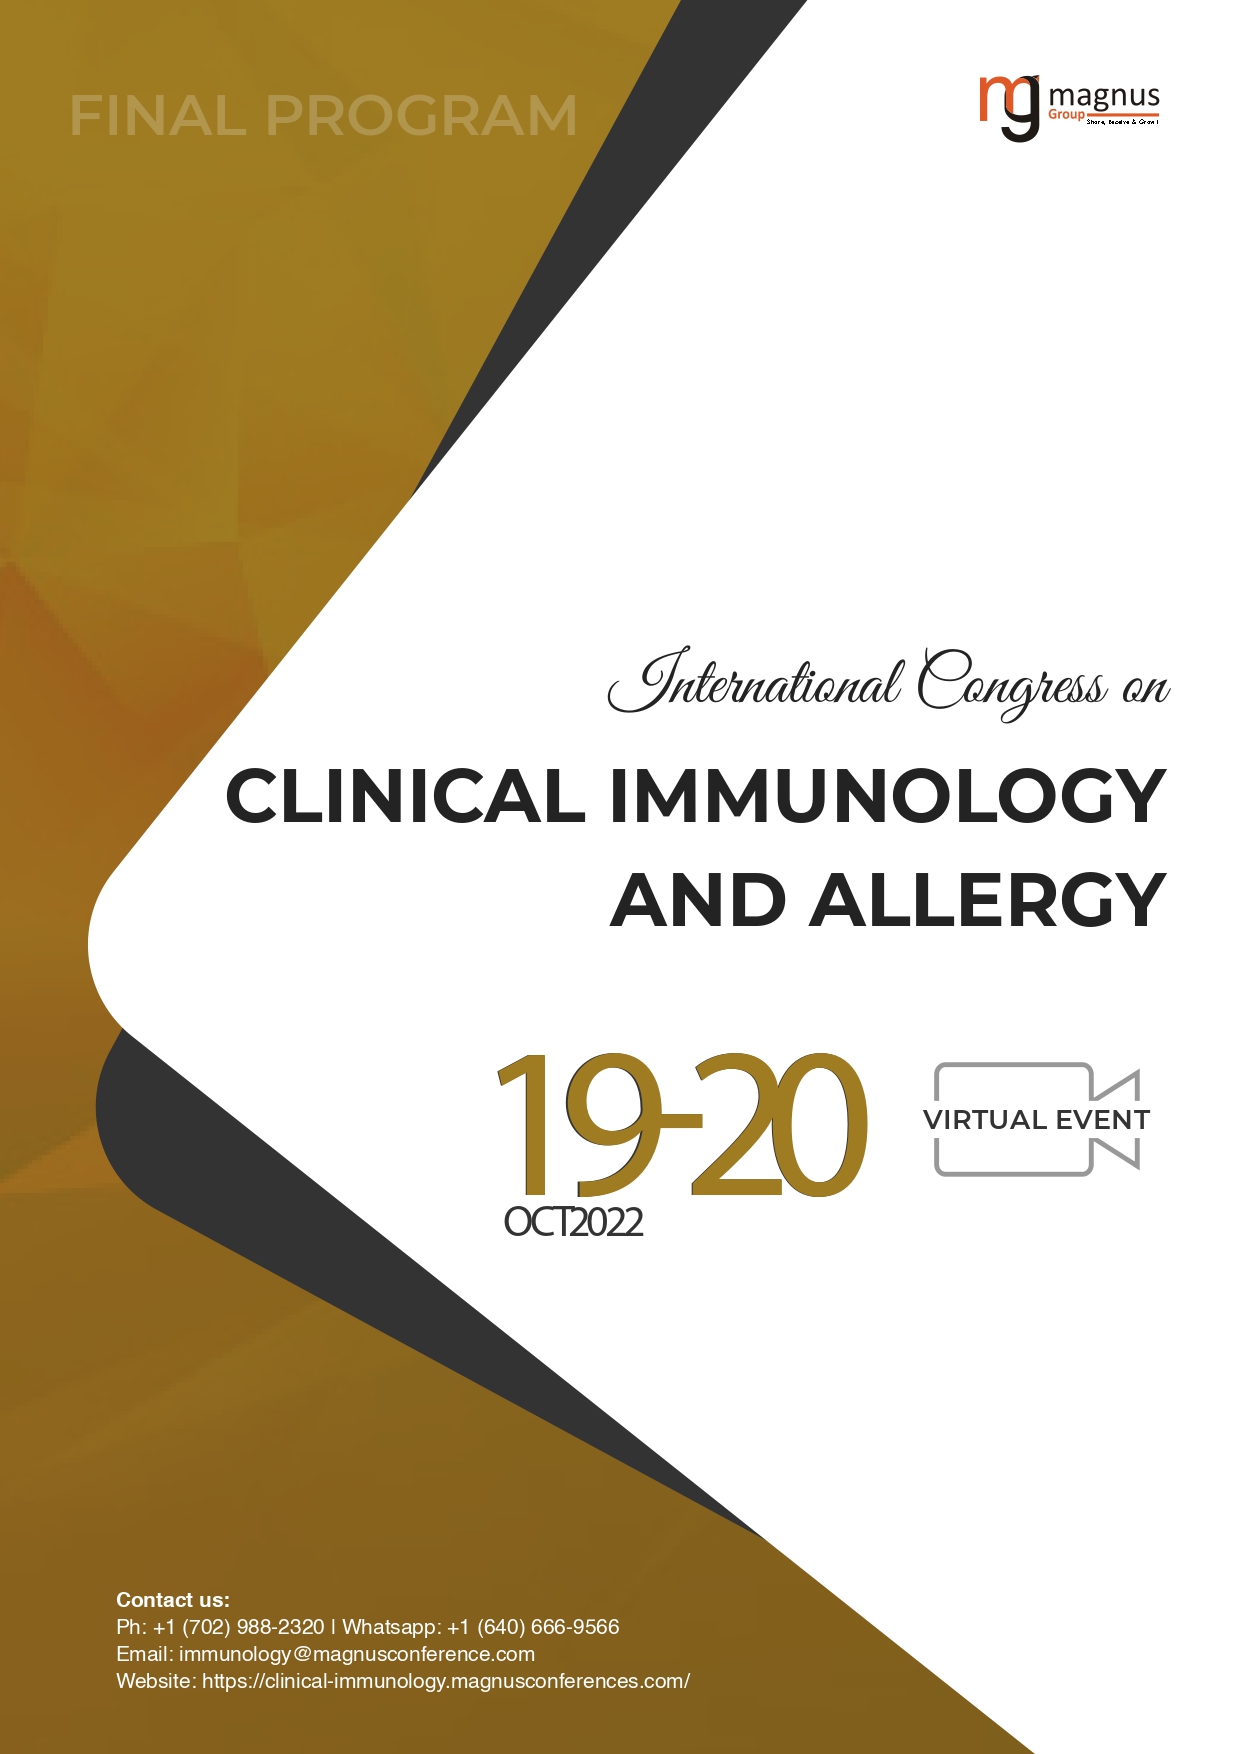 International Conference on Clinical Immunology and Allergy | Online Event Program